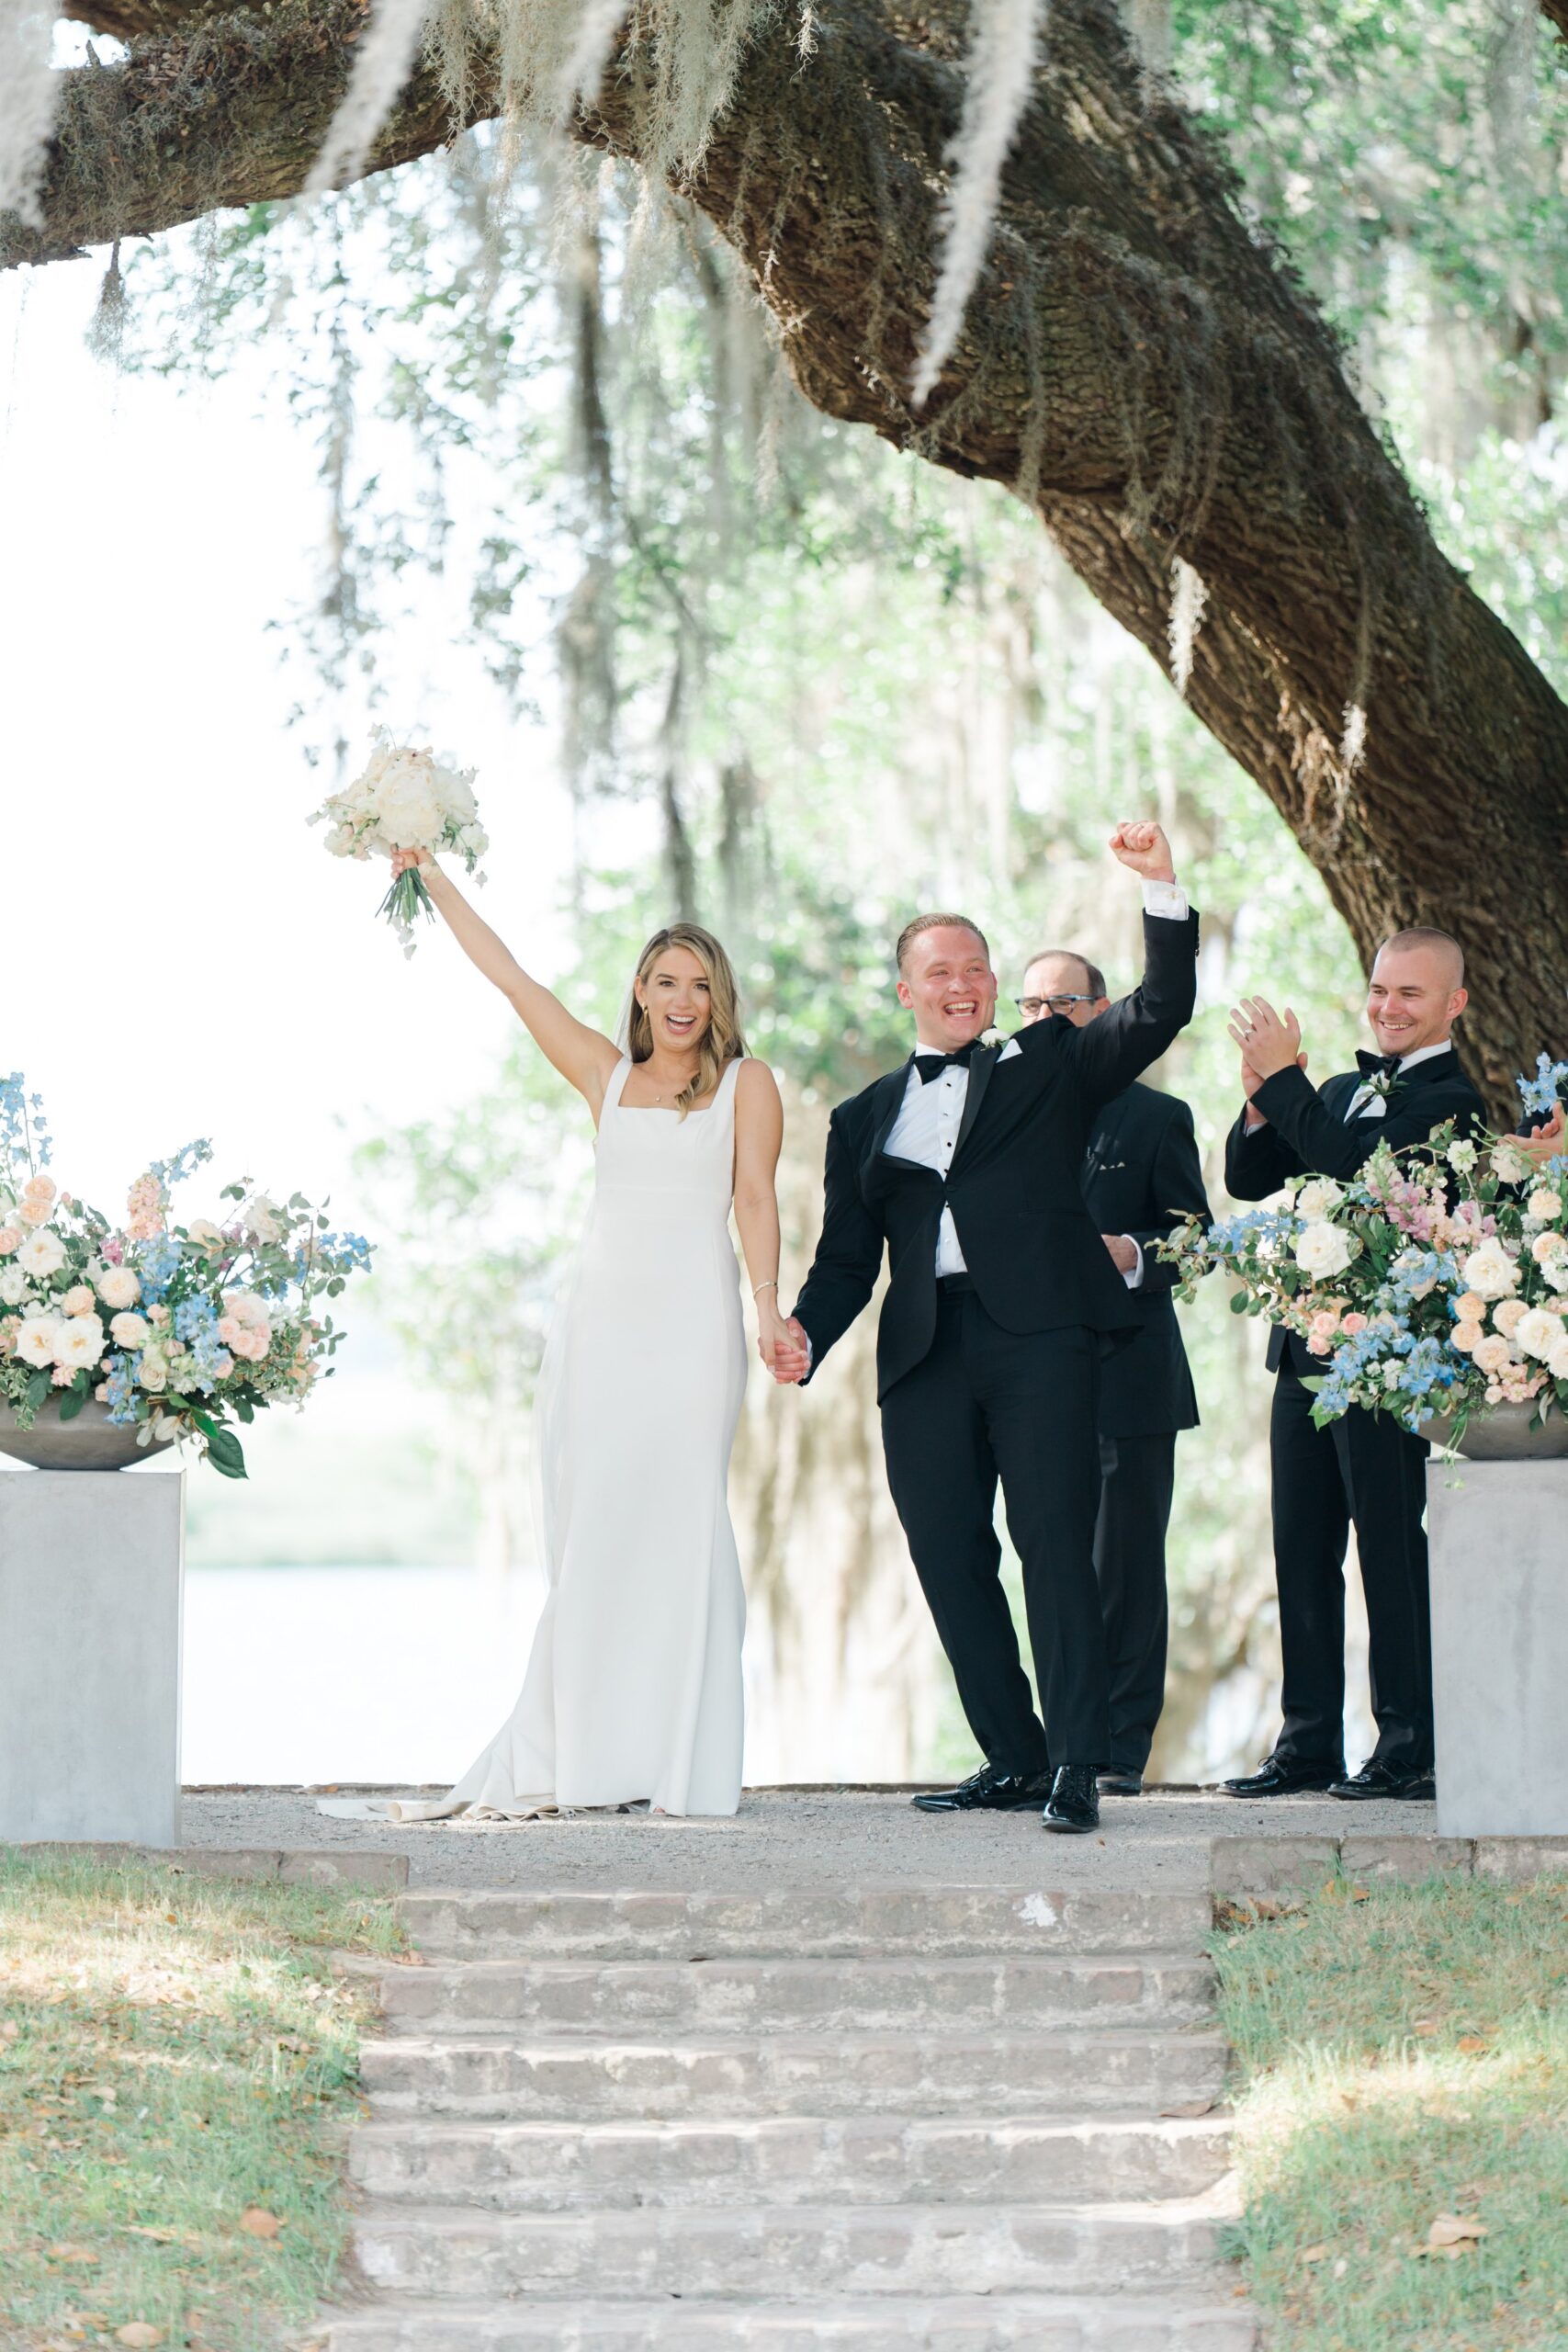 Bride and groom celebrate after first kiss. Charleston spring wedding.